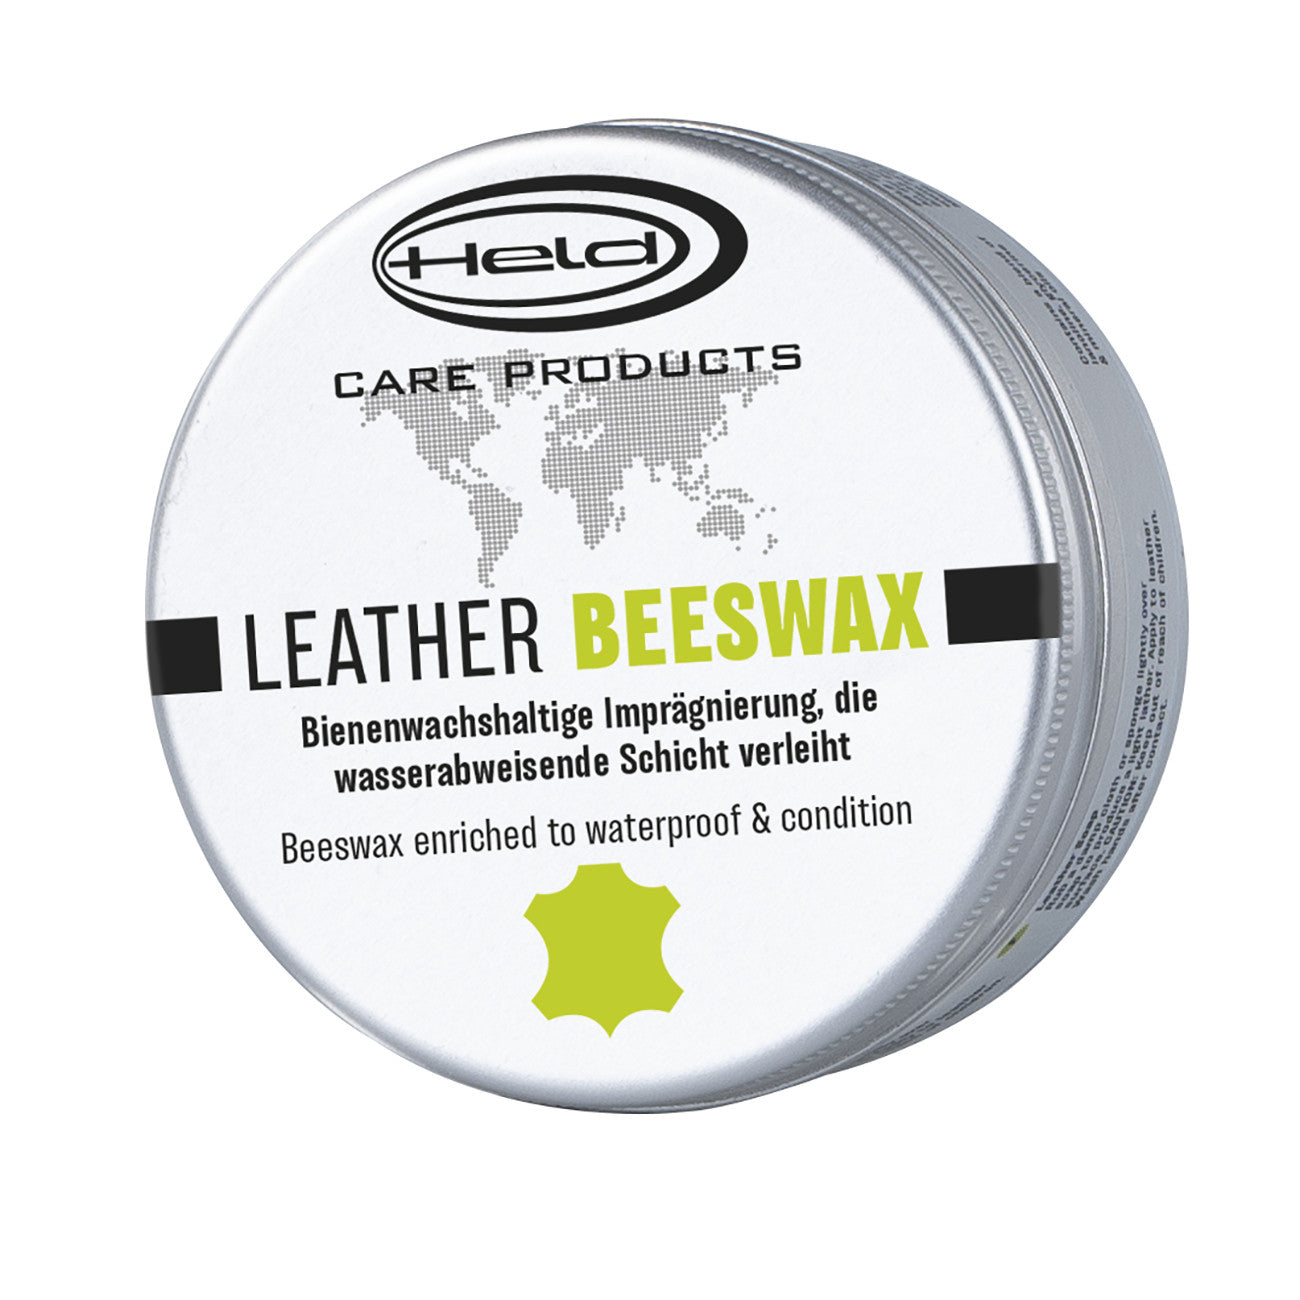 Leather beeswax for motorcycle gear from held